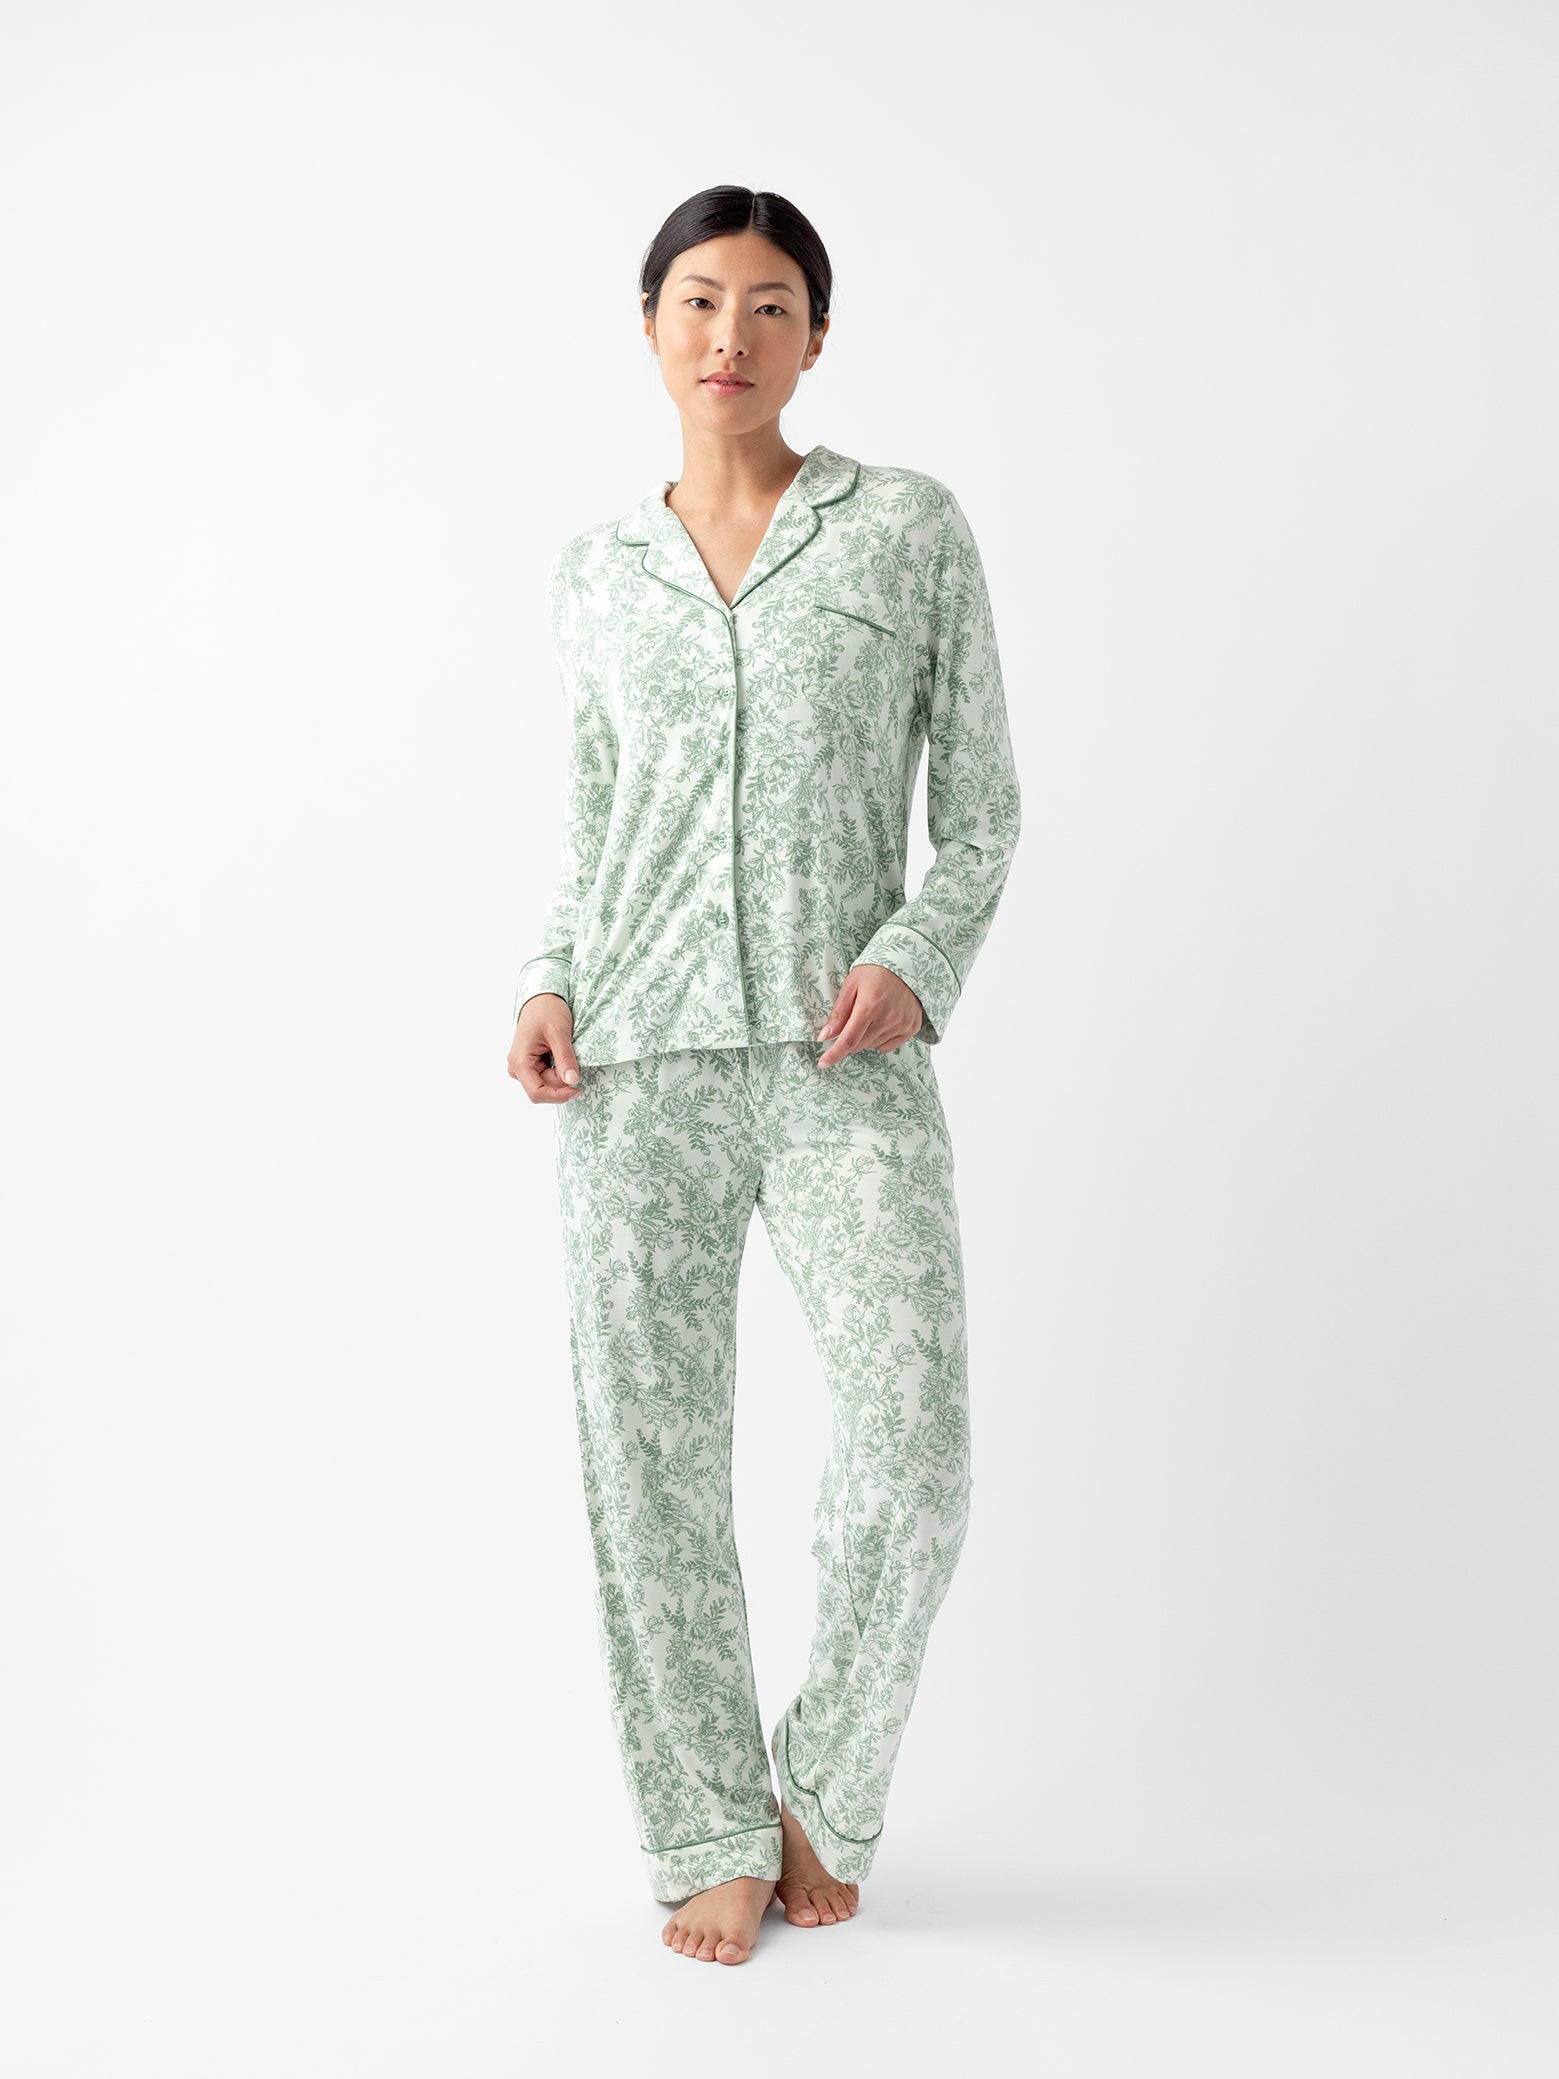 Woman standing in celadon toile pajama set with white background 